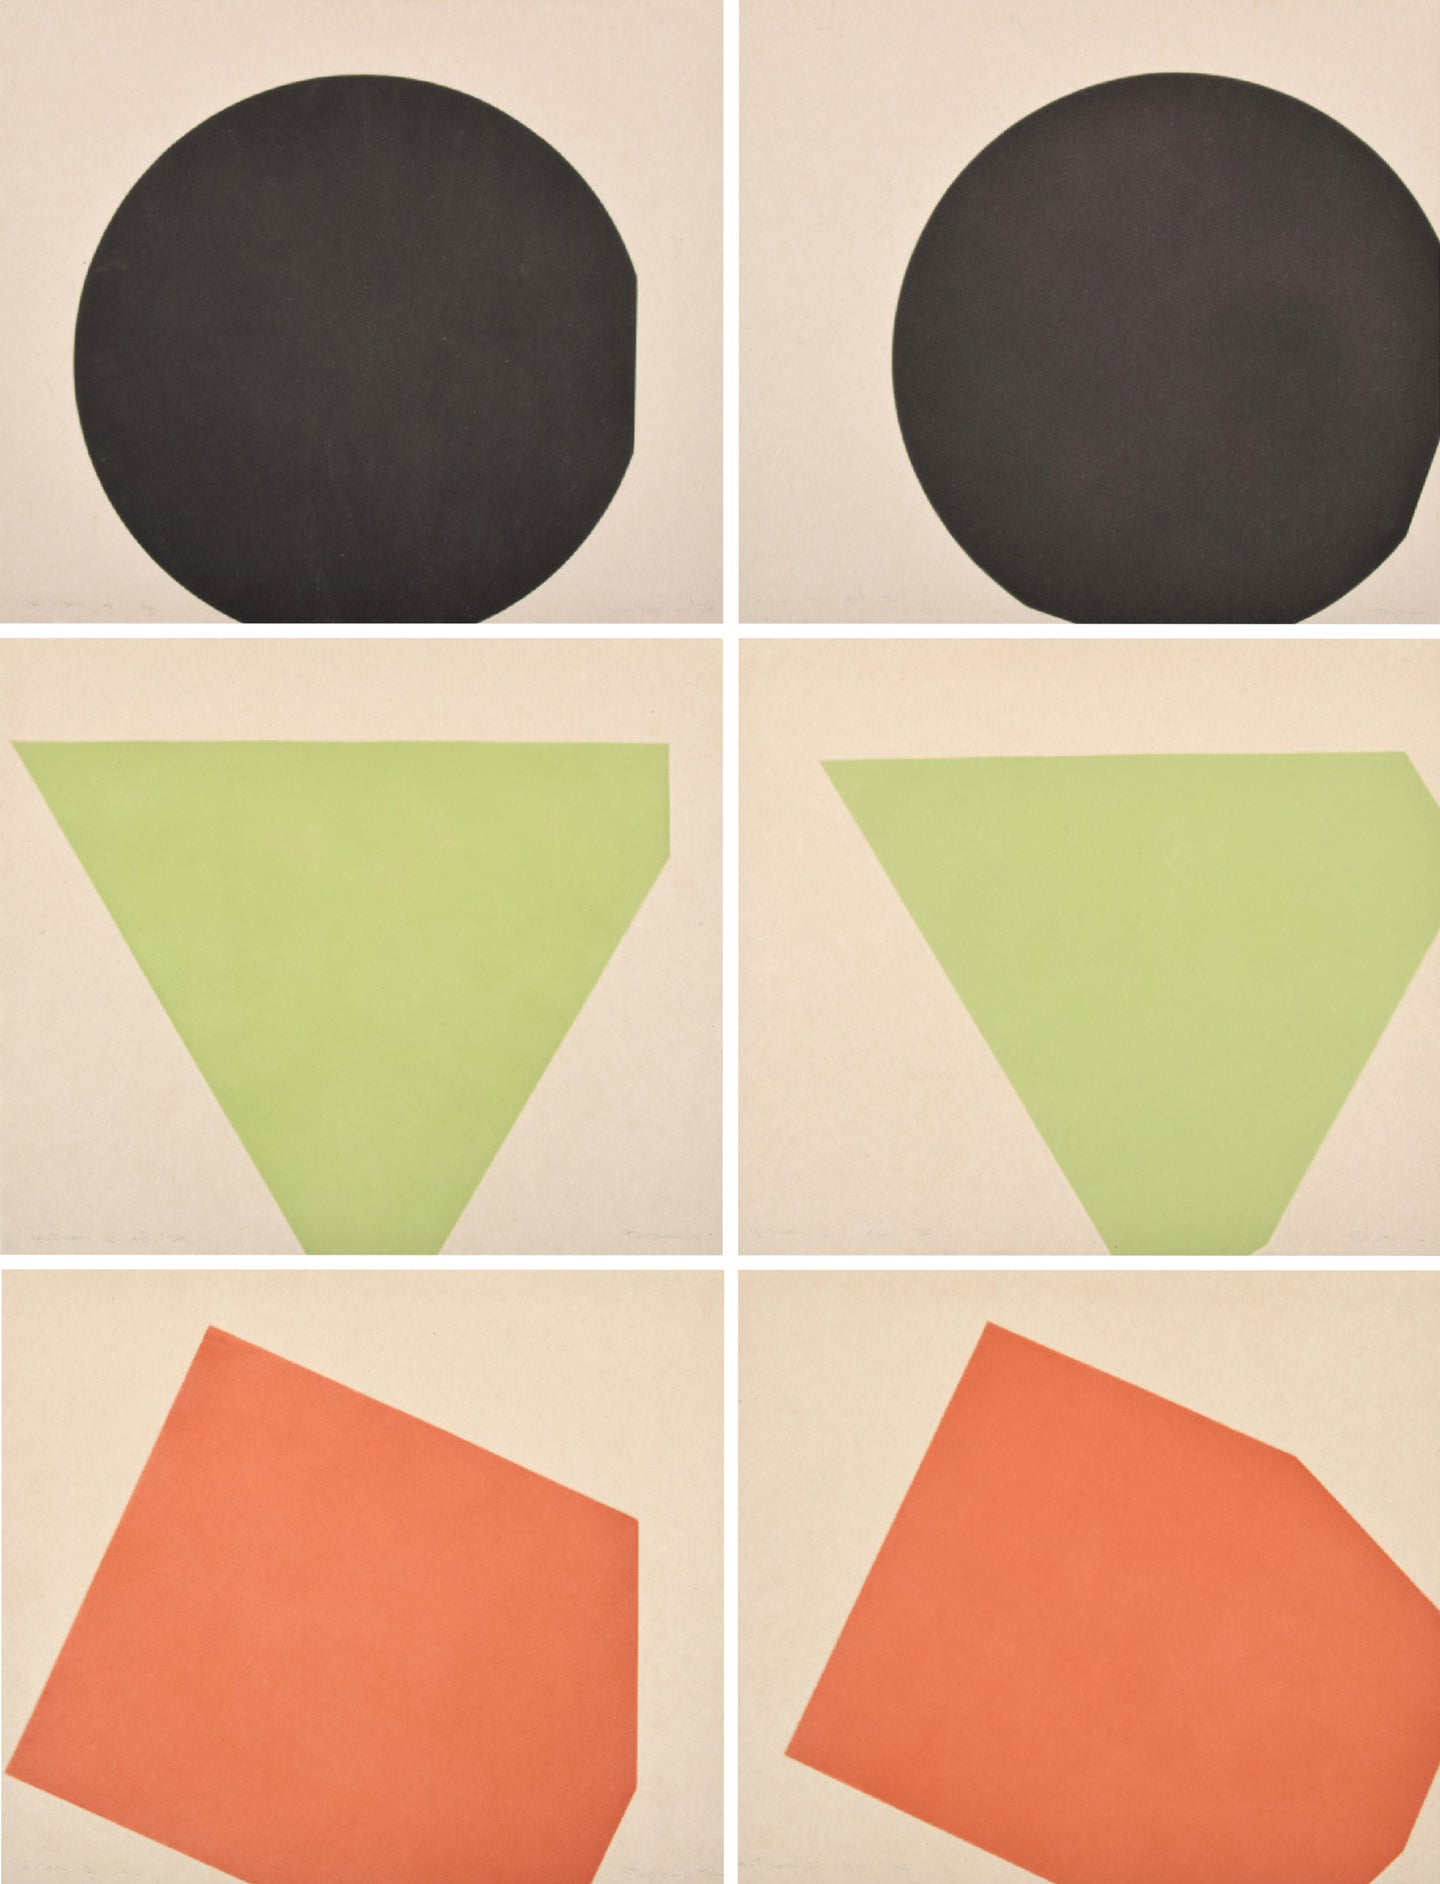 Gary Stephan (b. 1942-) If-Then (A, B, C, D, E, F) Artist Proof, 1974 Aquatint on paper 74.25 x 56.5 inches (Each Sheet: 24.75 x 28.25 inches) Artist Proof for Edition of 50 For sale at Manolis Projects Gallery , Miami, FL